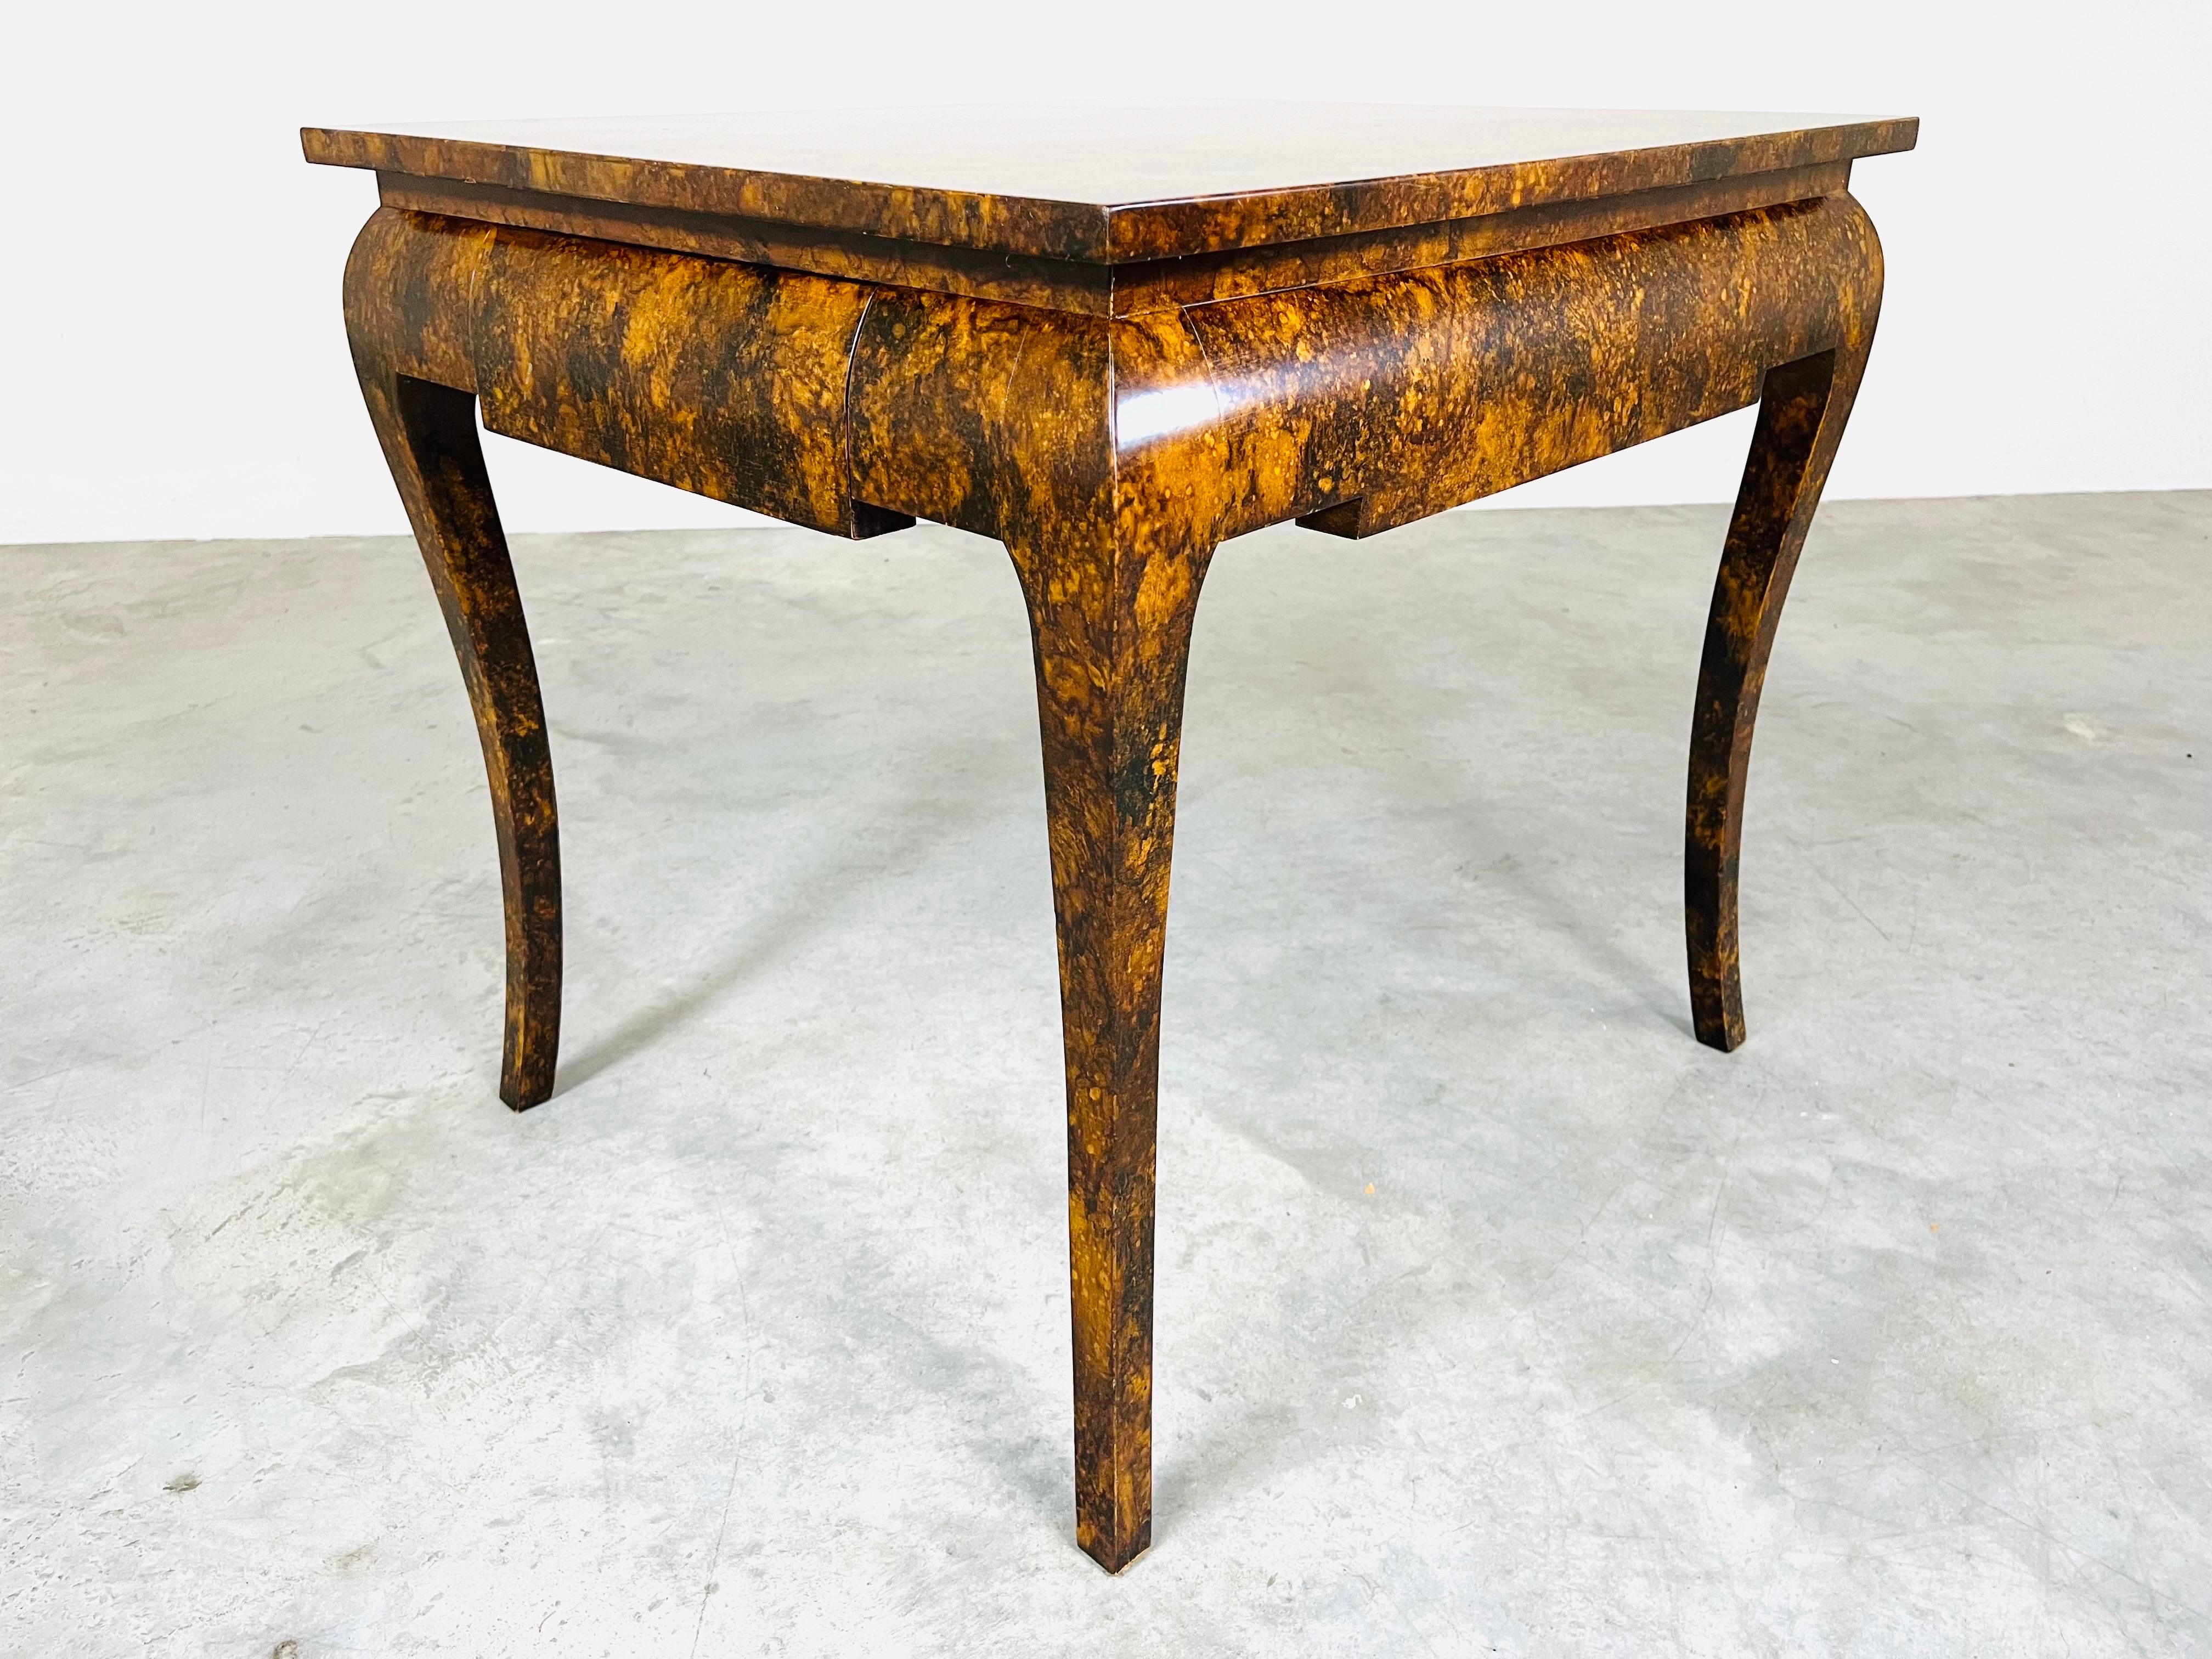 20th Century Regency Faux Tortoise Occasional End or Side Table Having SingleDrawer circa1935